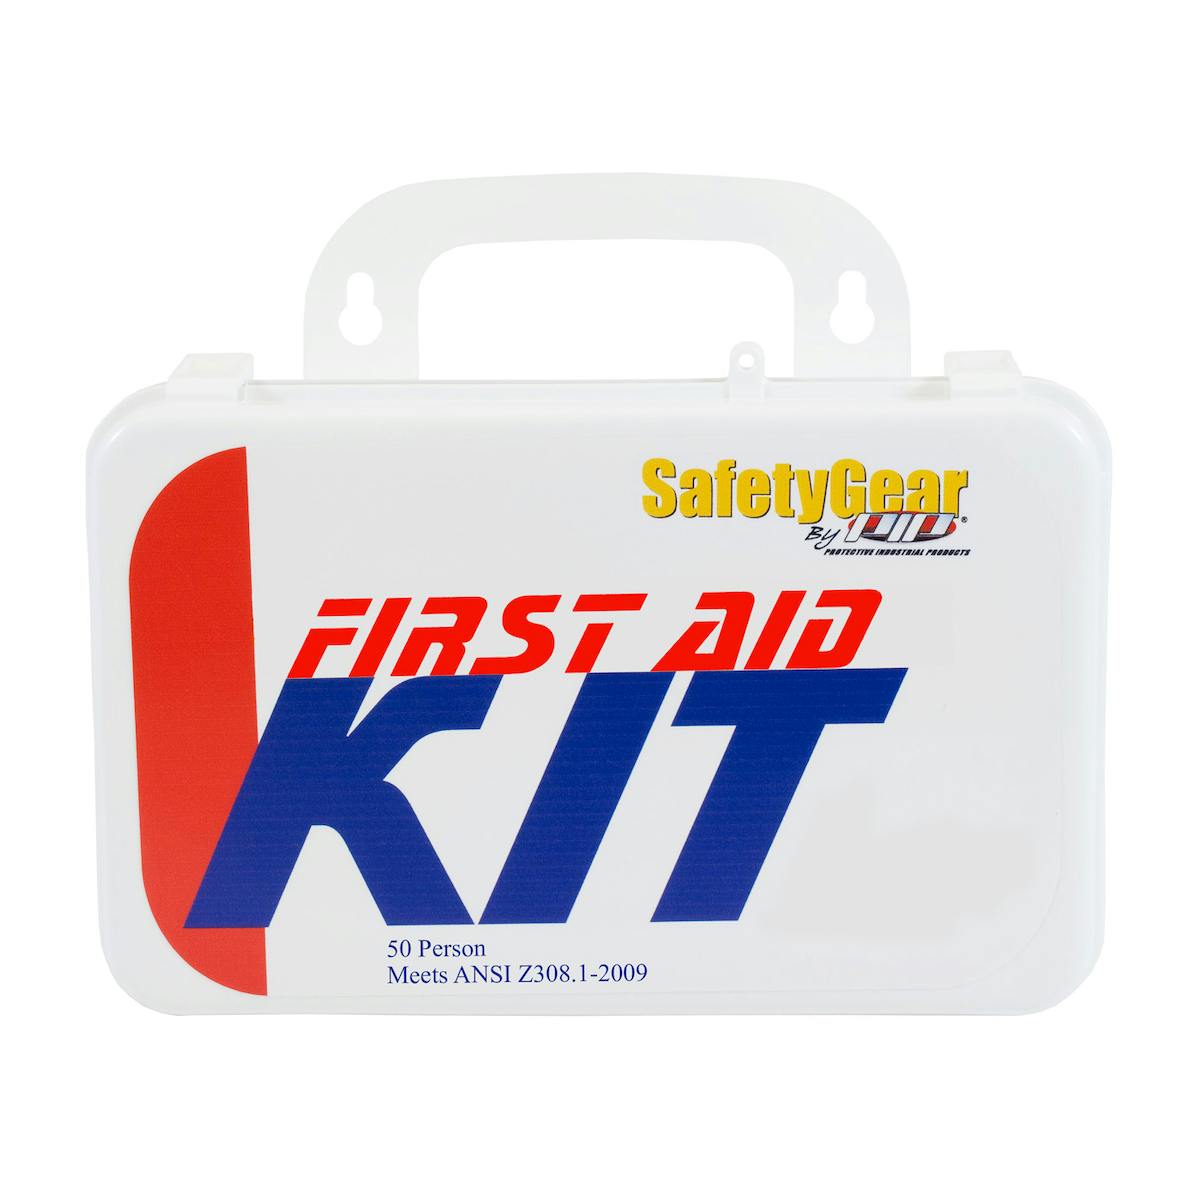 Personal First Aid Kit - 50 Person, White (299-13255) - KIT